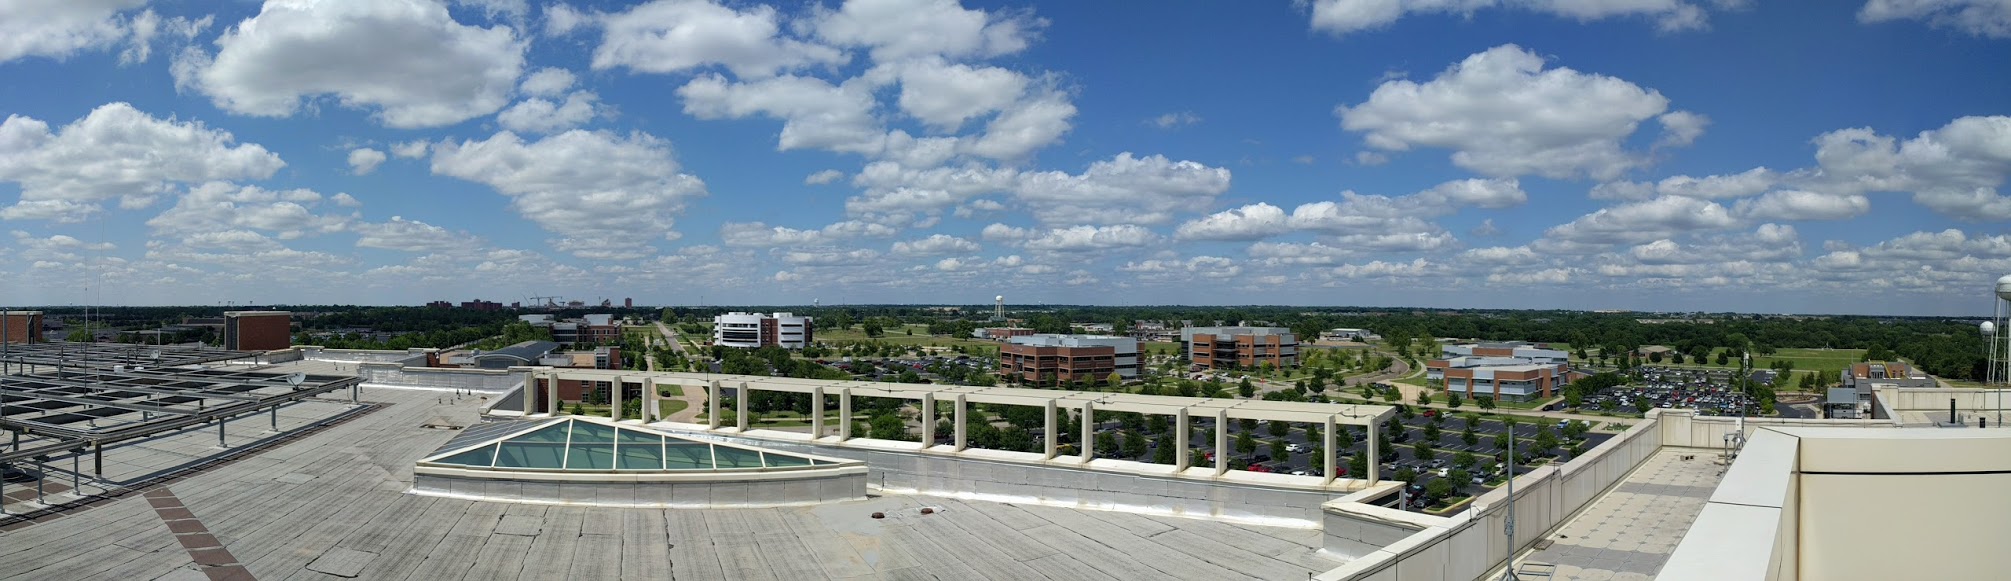 OU Campus viewed from NWC roof